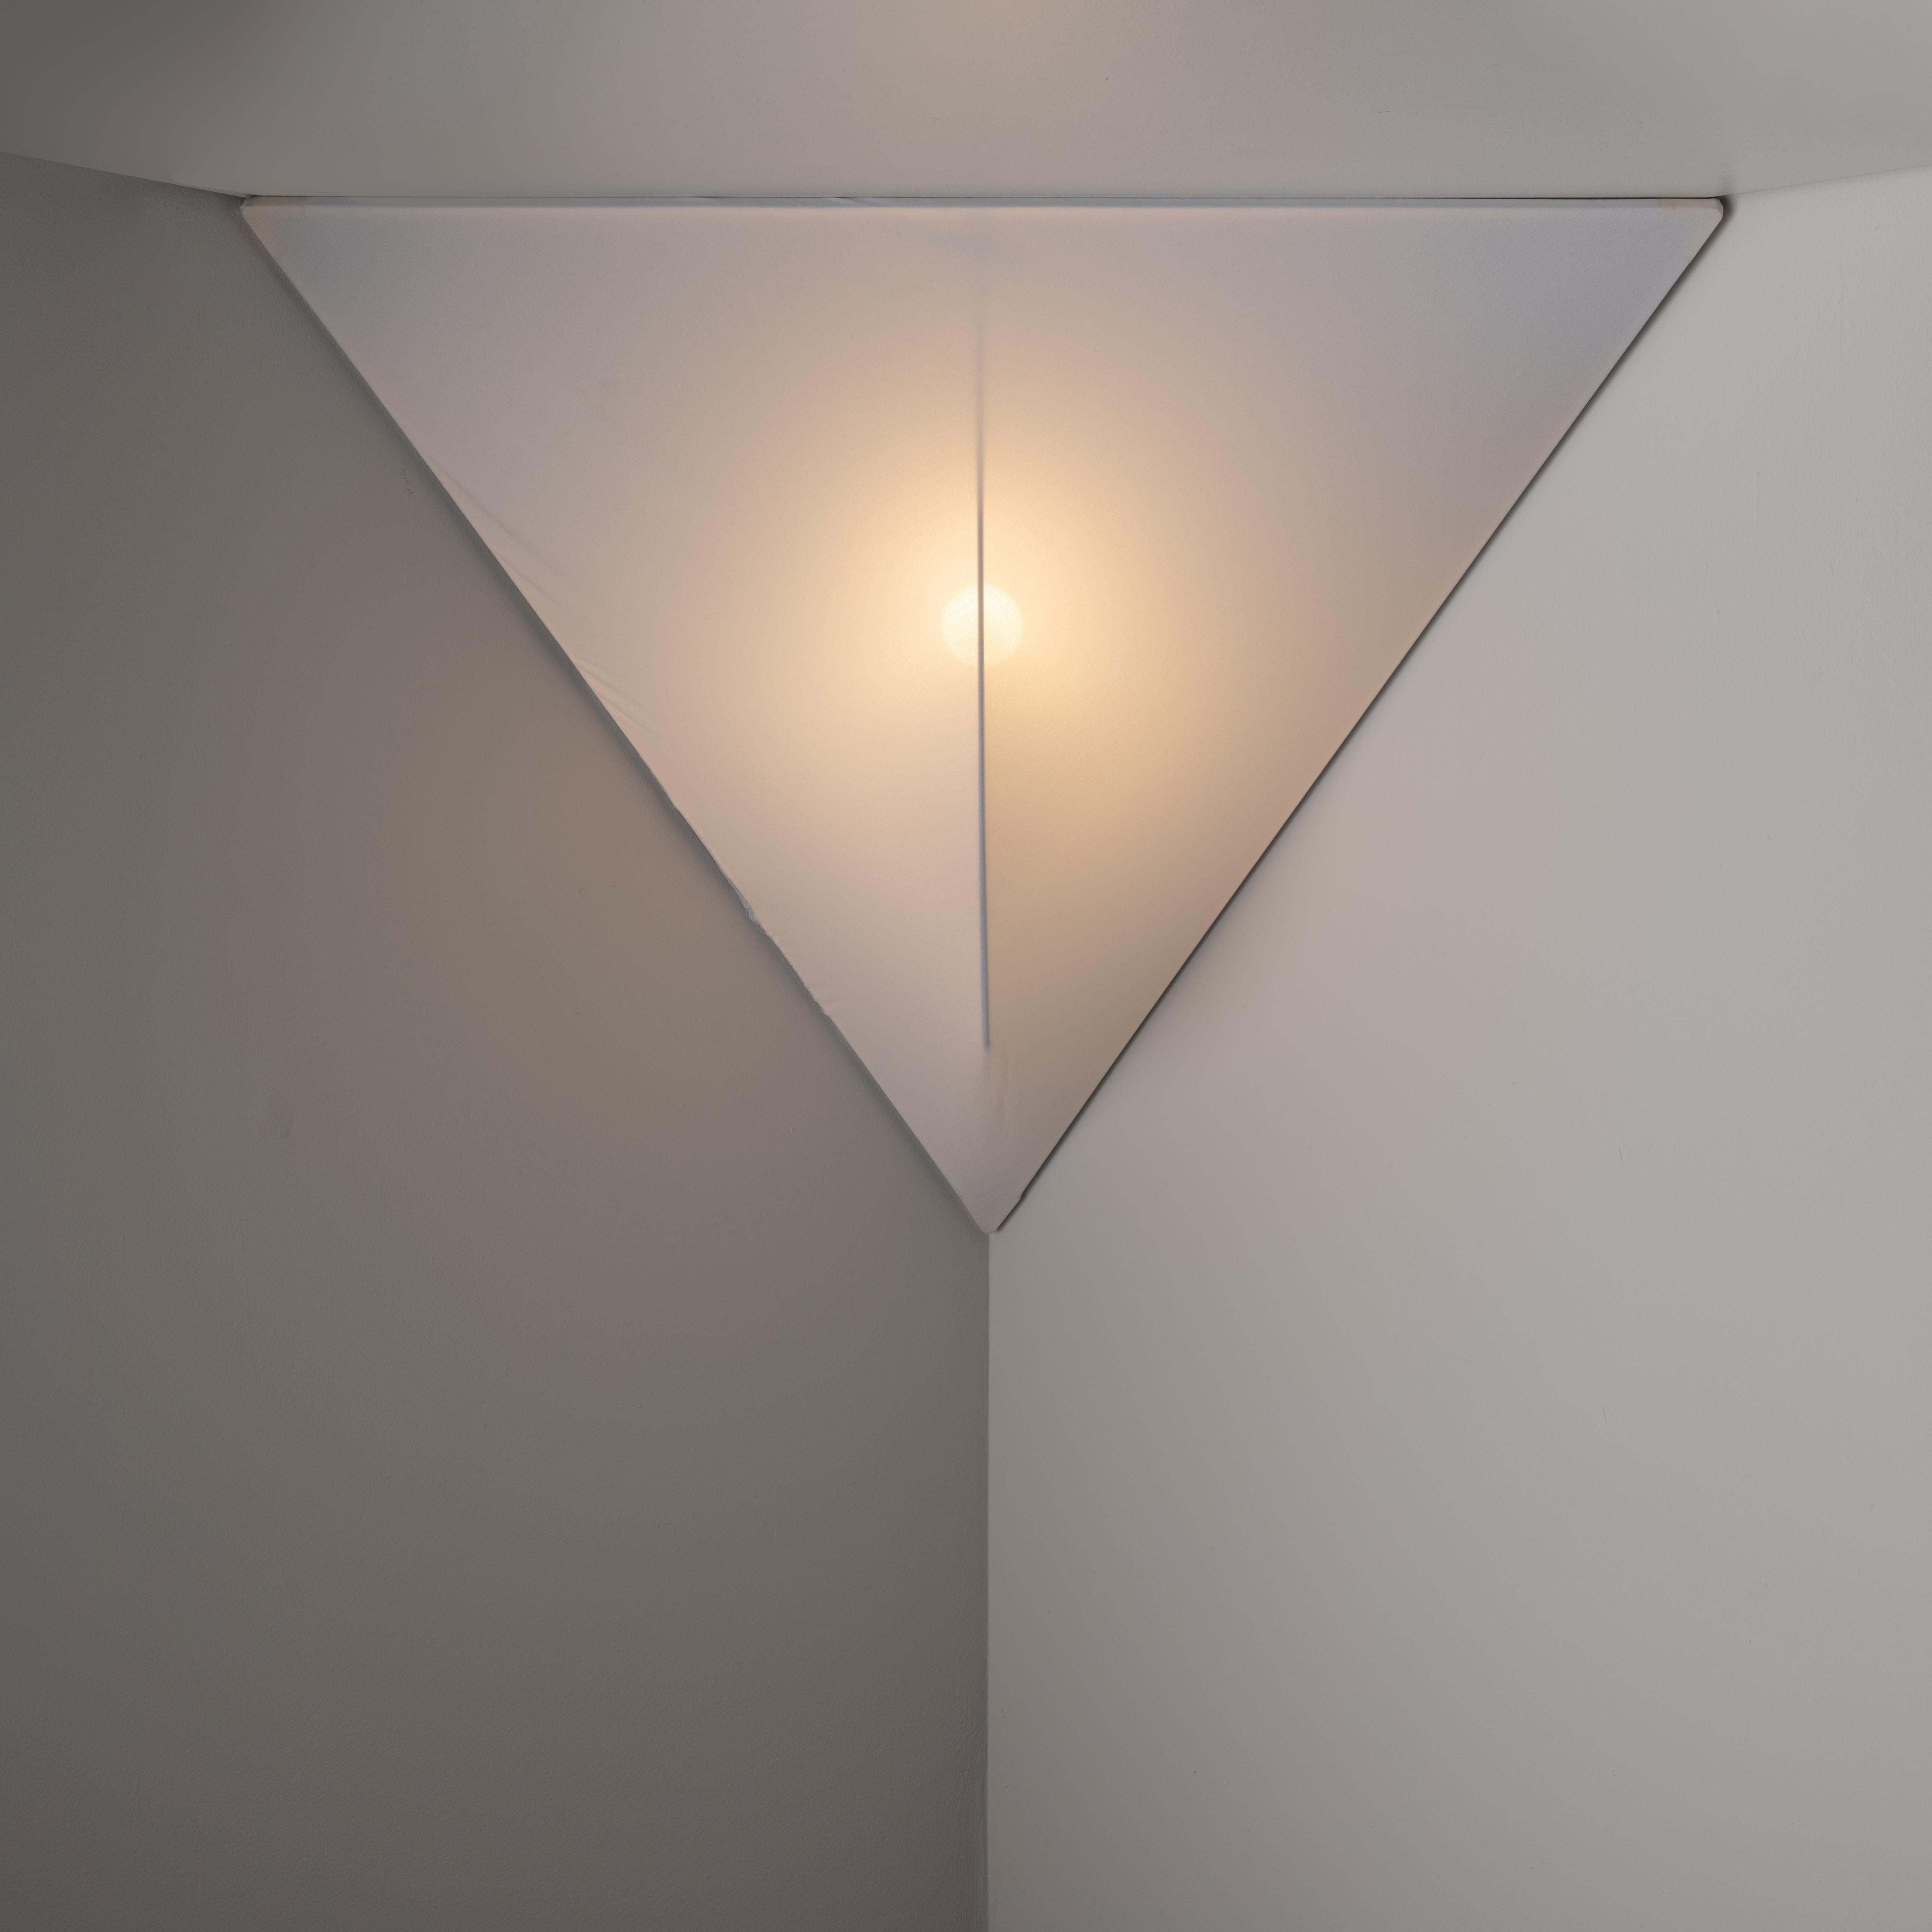 Sanka 2 Wall Light by Kazuhide Takahama for Sirrah In Good Condition For Sale In Los Angeles, CA